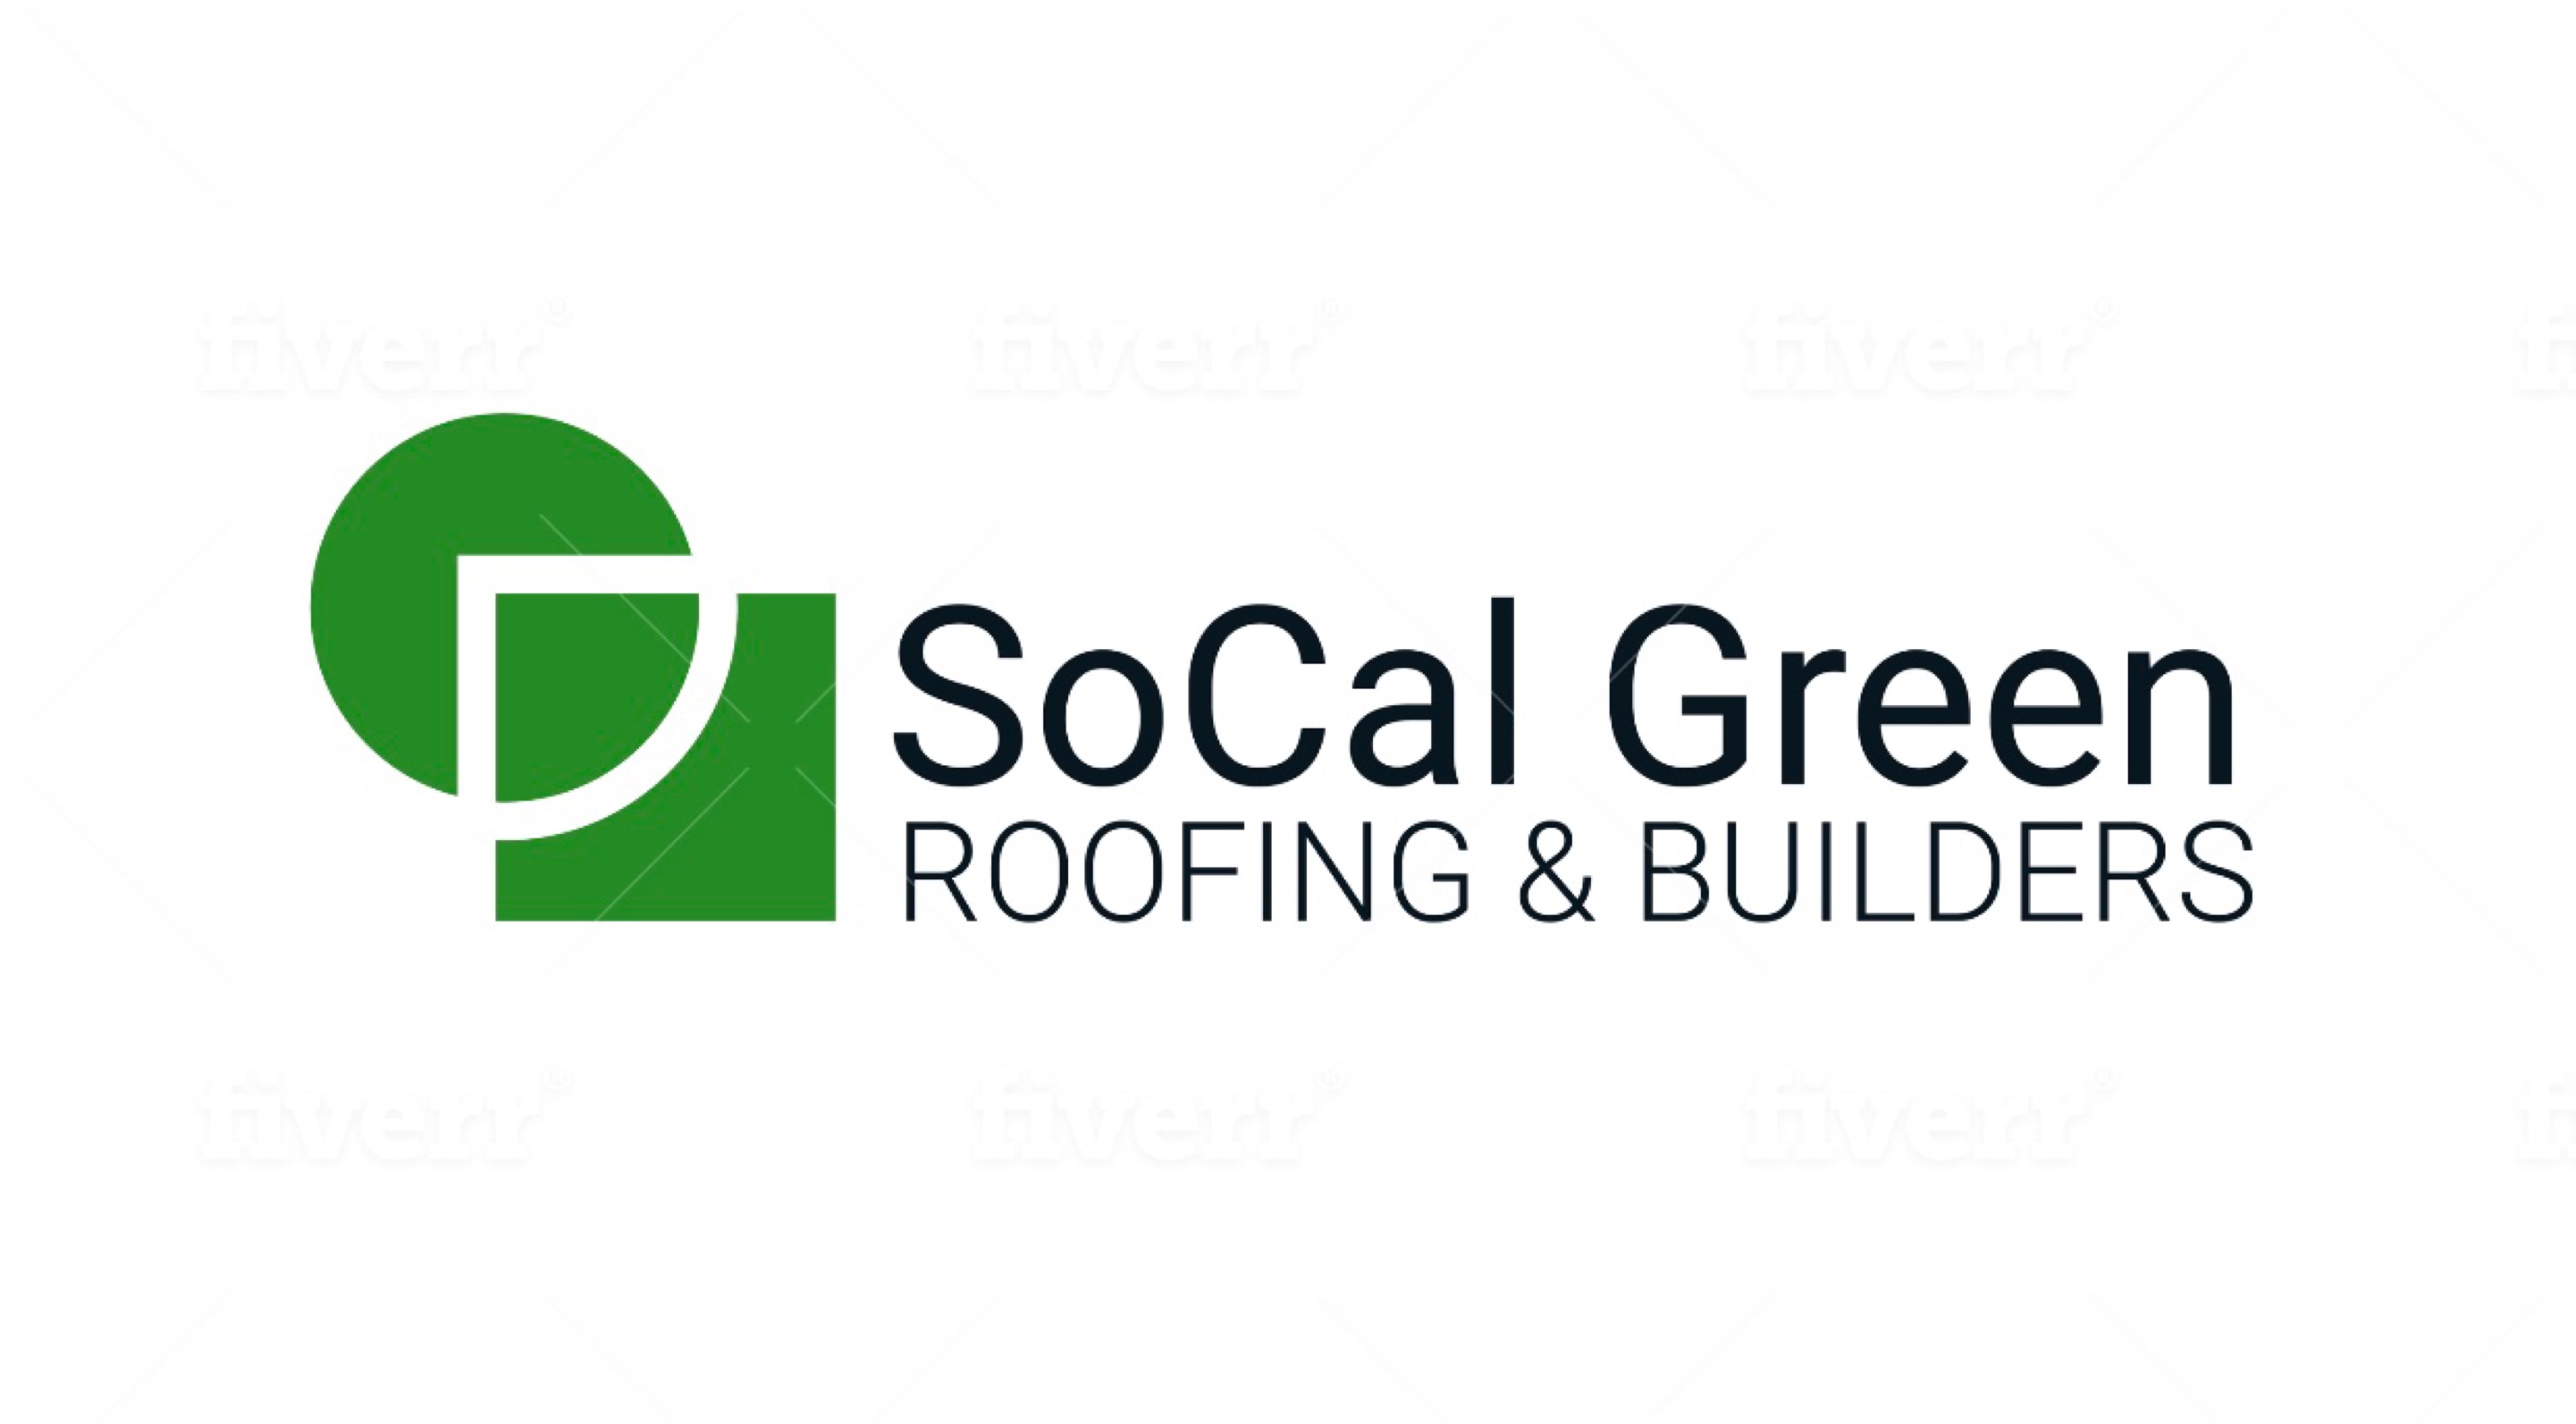 SoCal Green Roofing & Builders Logo